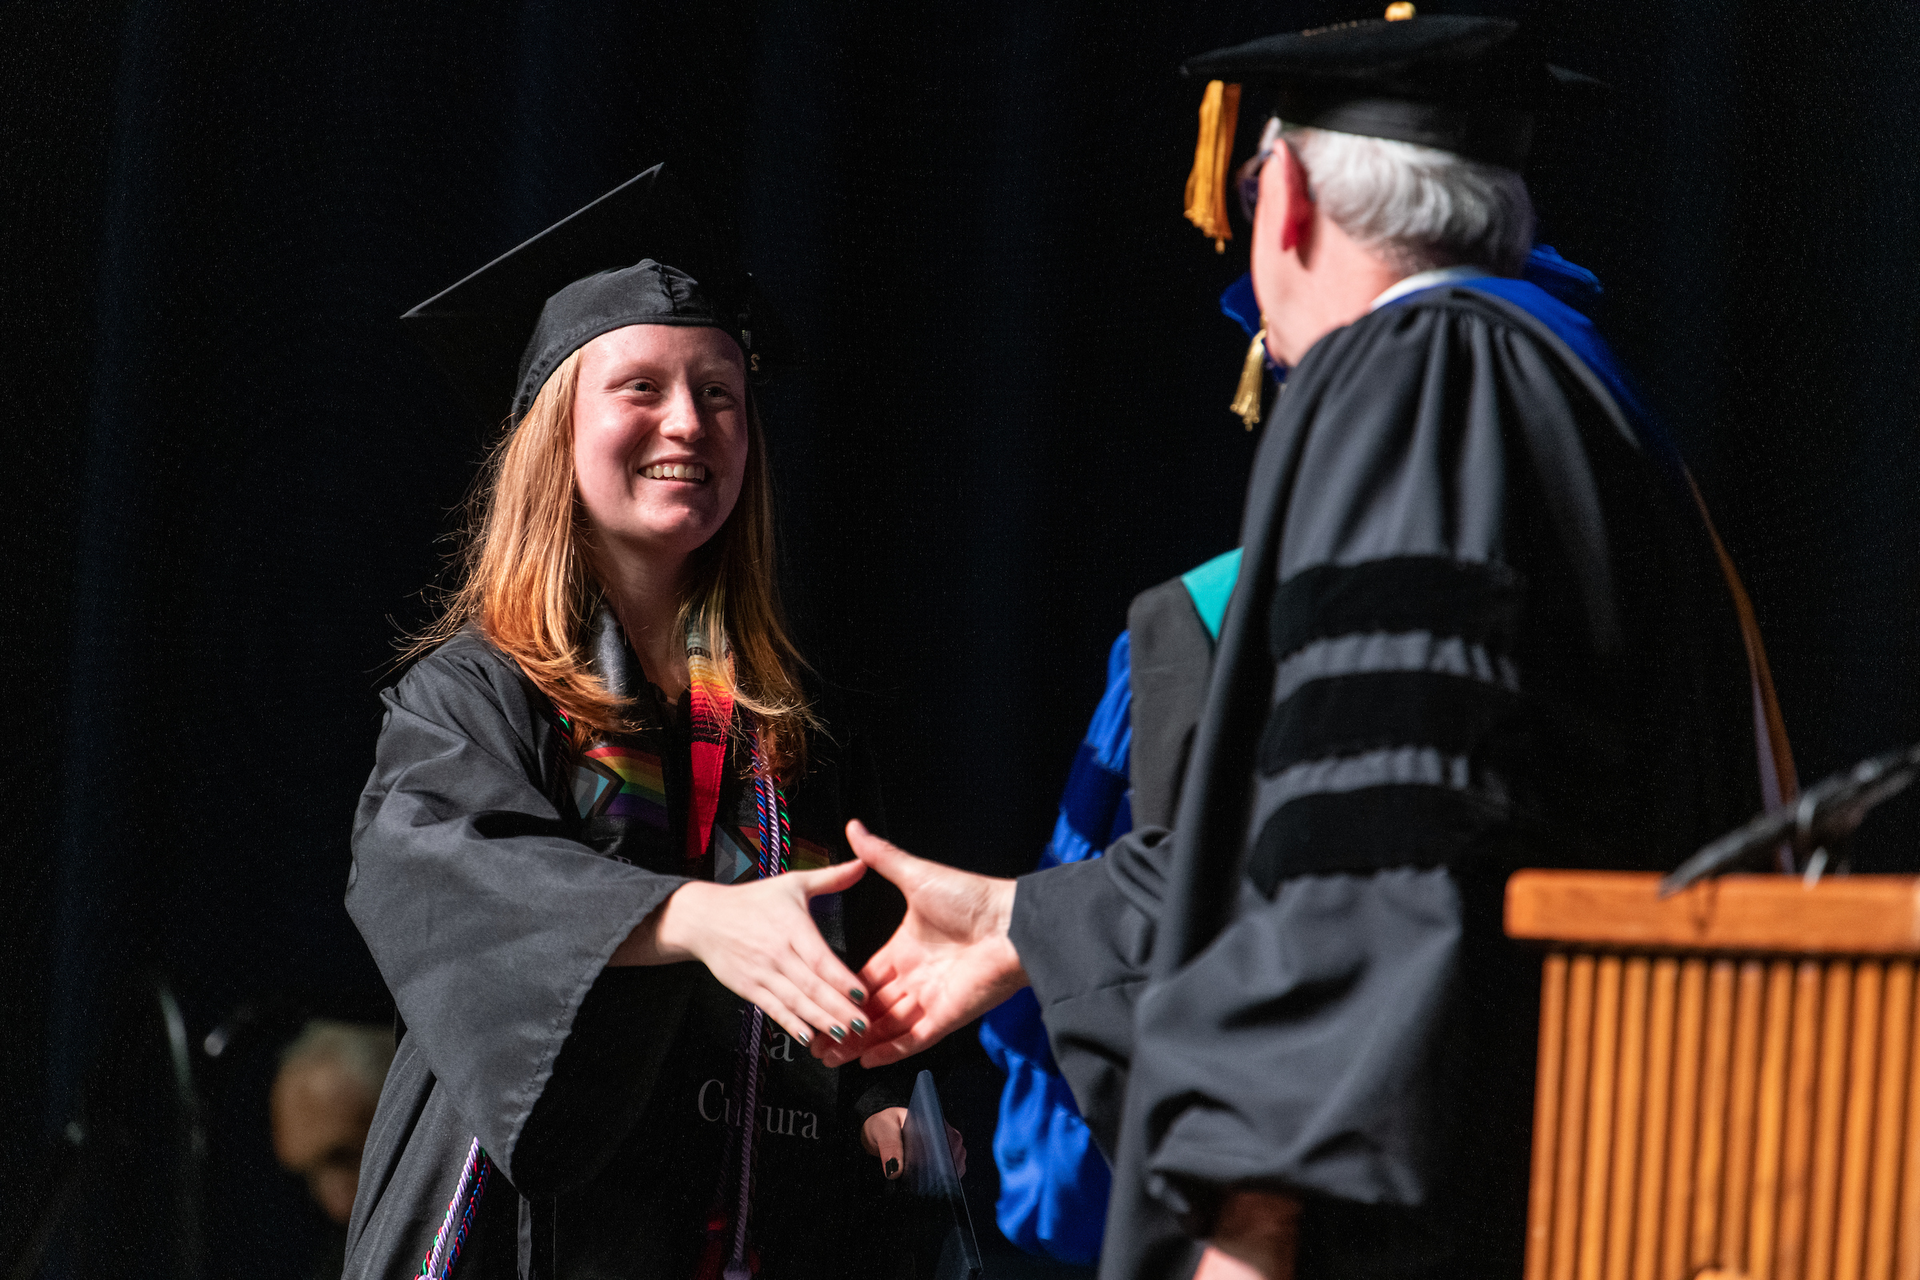 Young woman with red hair wearing a cap and mortar board shakes the hand of an administrator while on stage at Commencement.